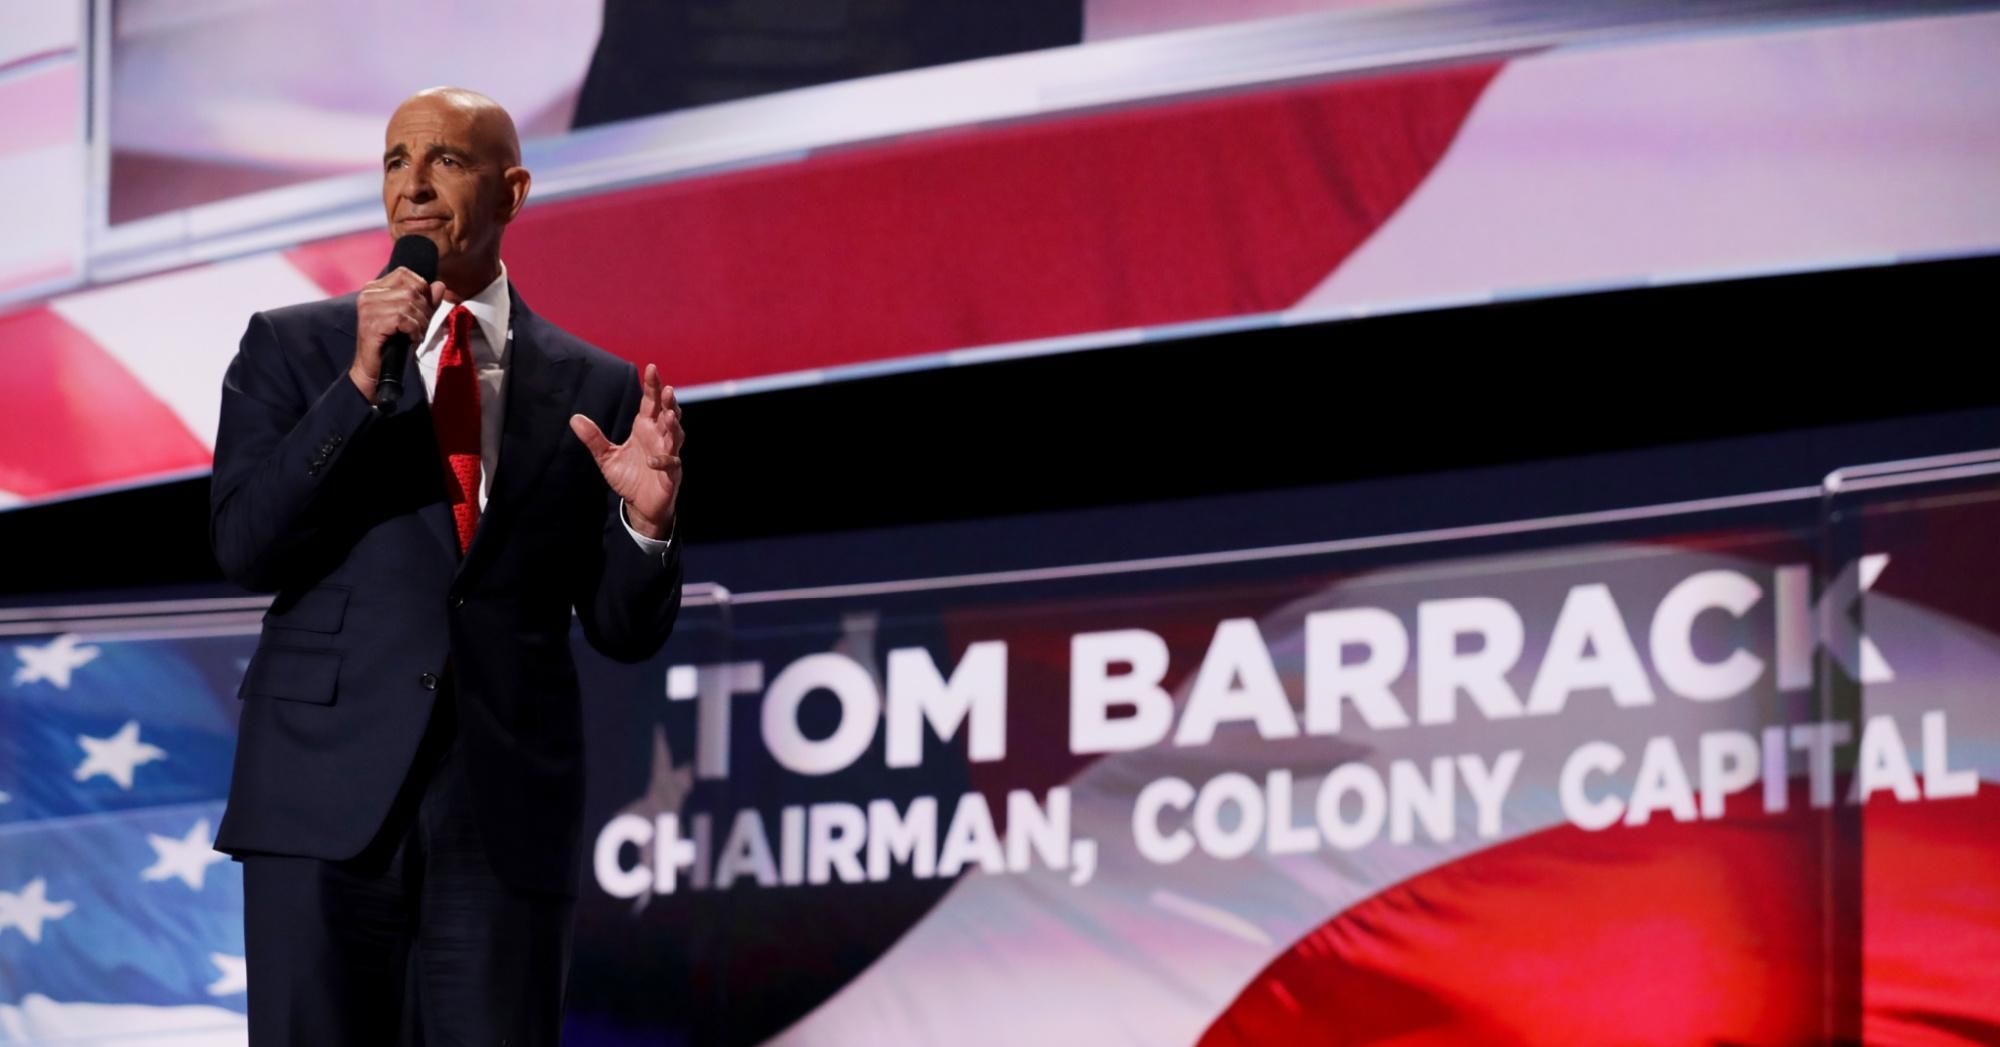 Tom Barrack, a real estate investor and founder of Colony Capital, delivers a speech on the fourth day of the Republican National Convention on July 21, 2016 at the Quicken Loans Arena in Cleveland, Ohio. (Photo: Chip Somodevilla via Getty Images)